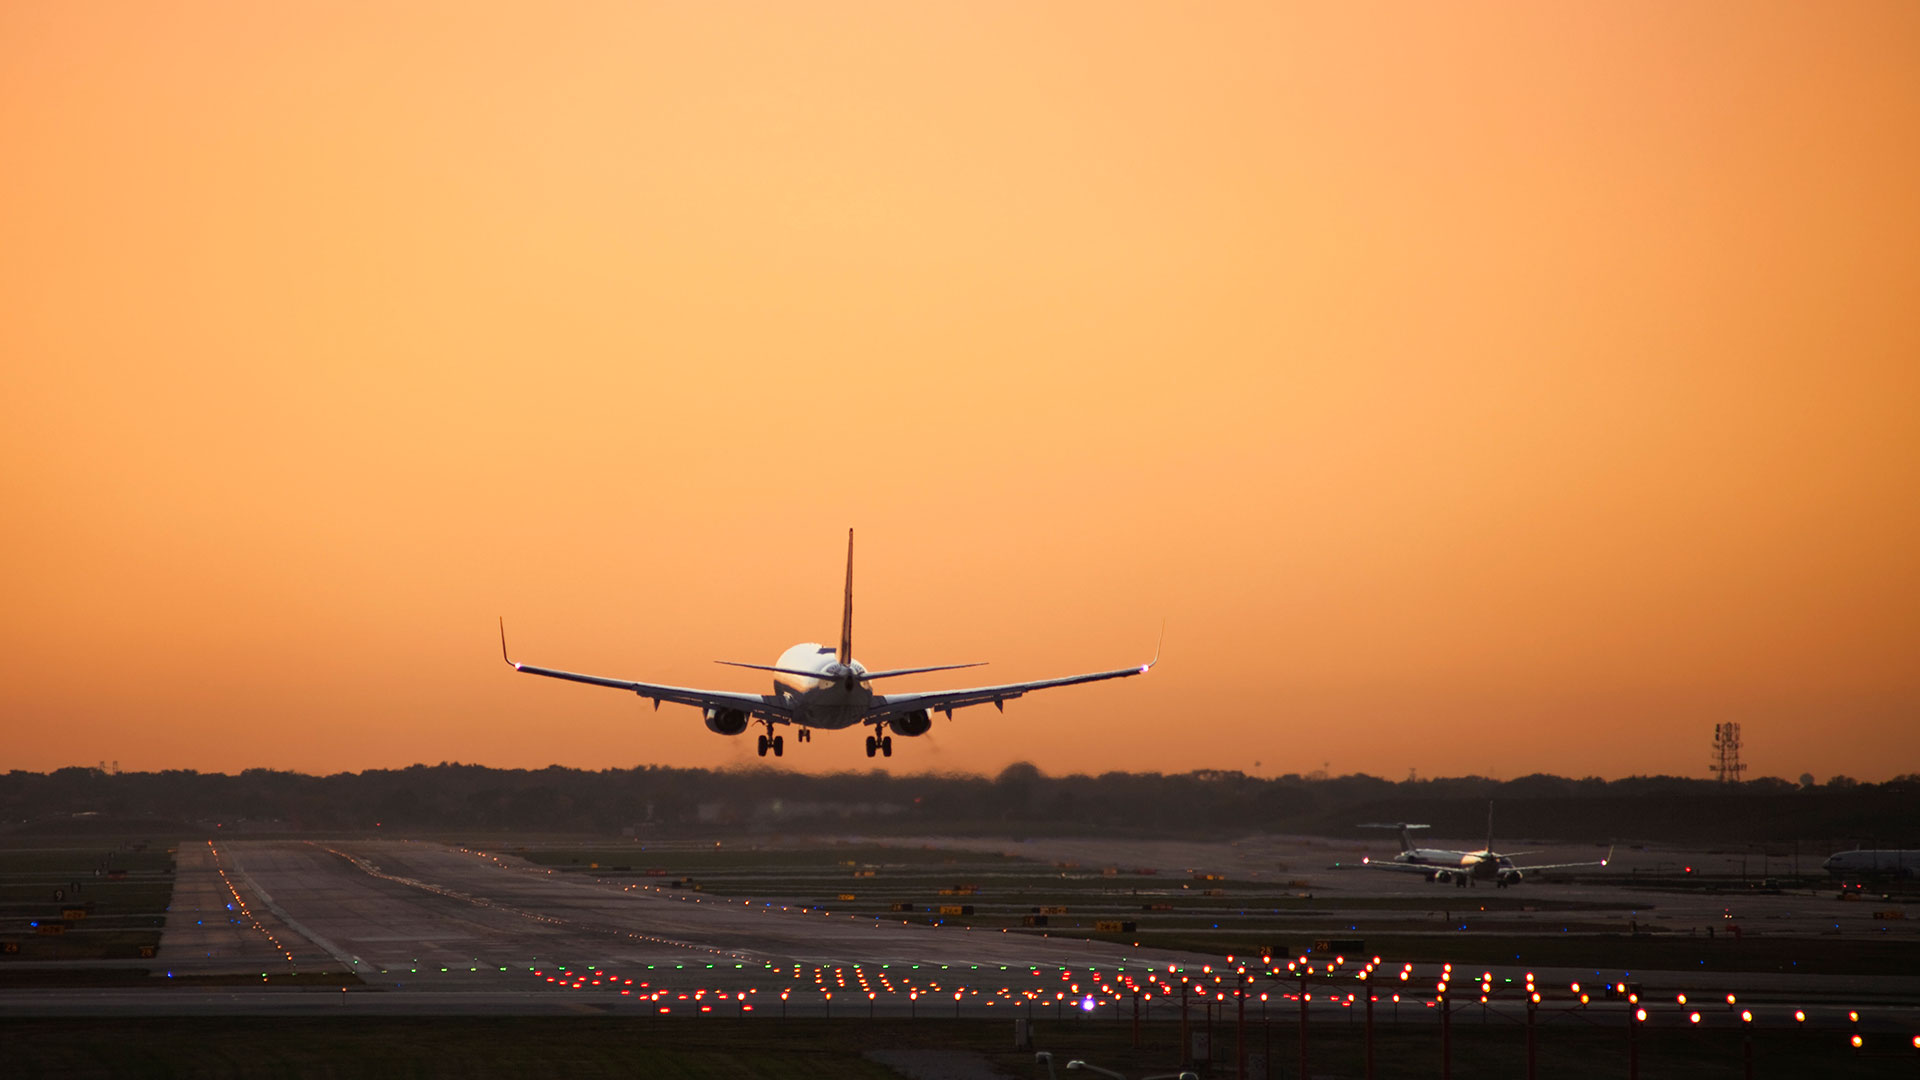 A plane just about to land on a runway at dusk: the sky is entirely orange.